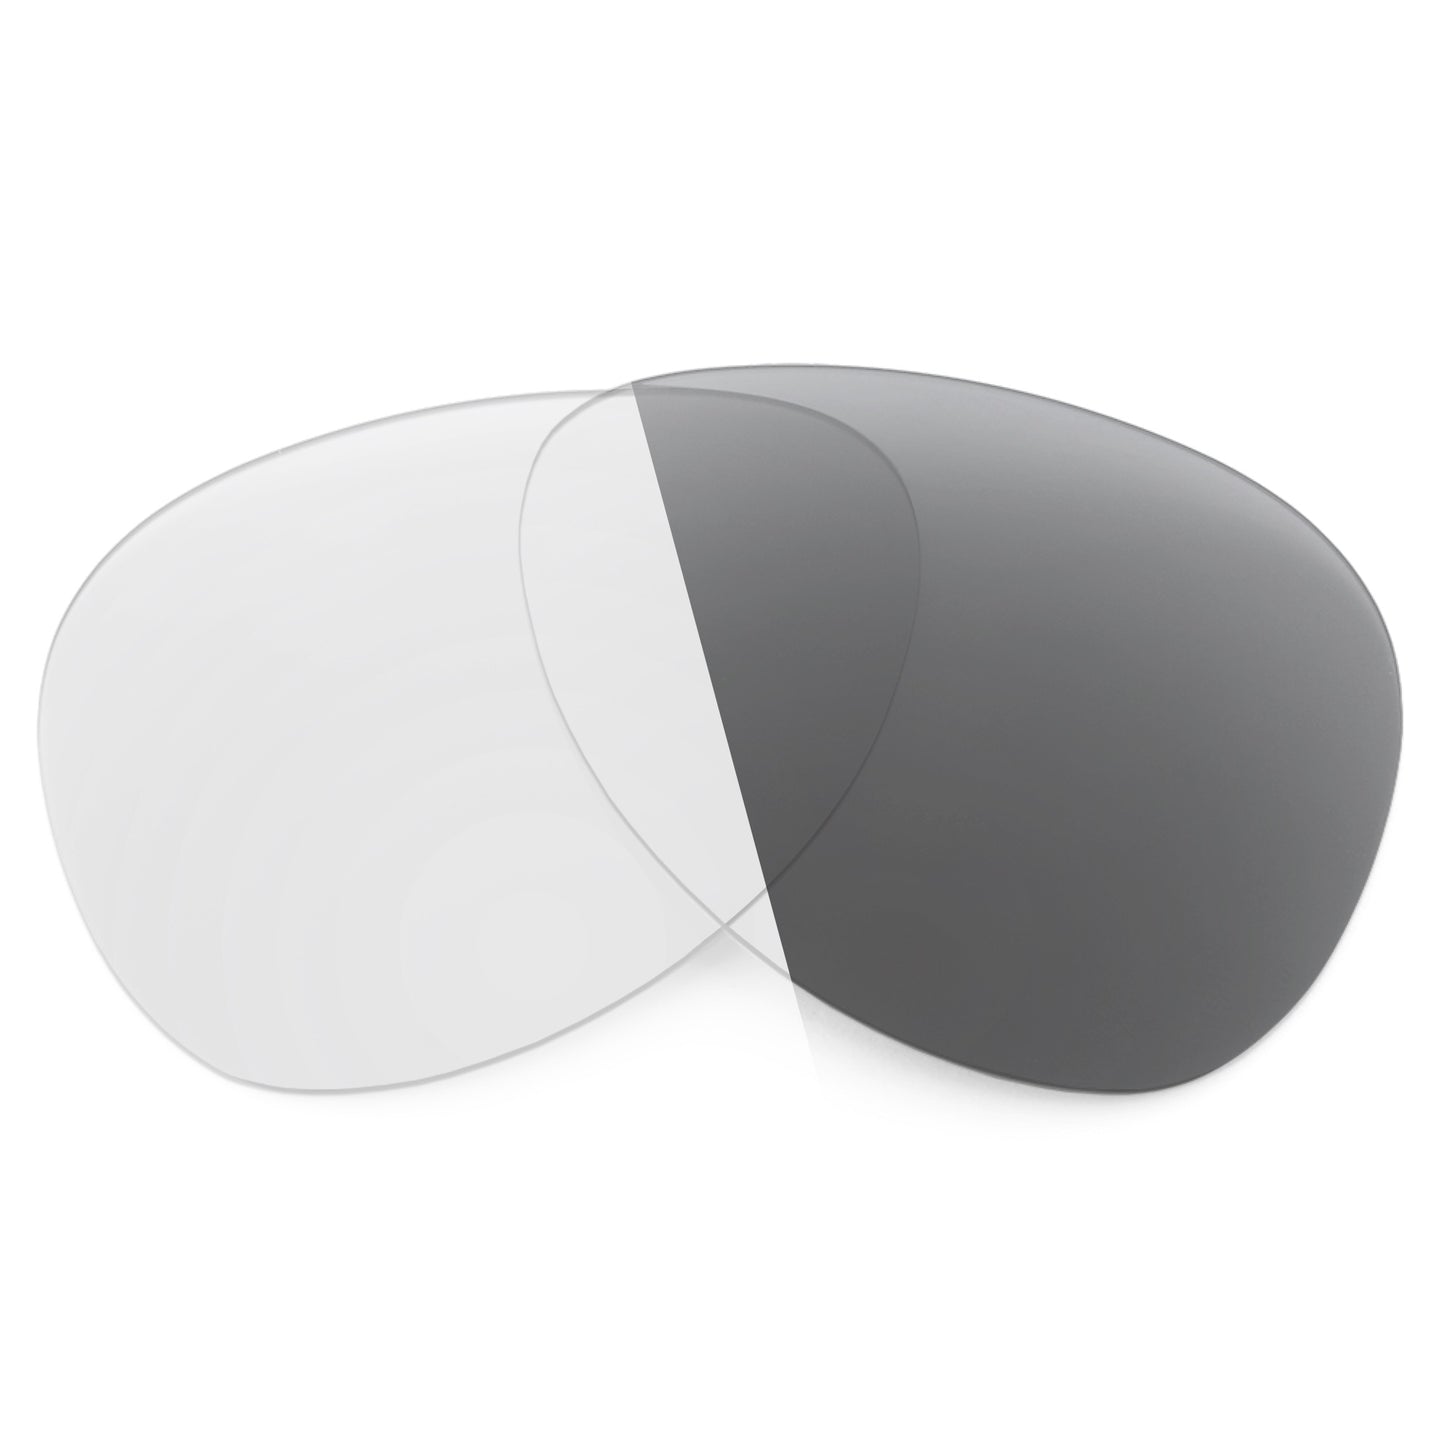 Revant replacement lenses for Ray-Ban Cats 1000 RB4126 57mm Non-Polarized Adapt Gray Photochromic